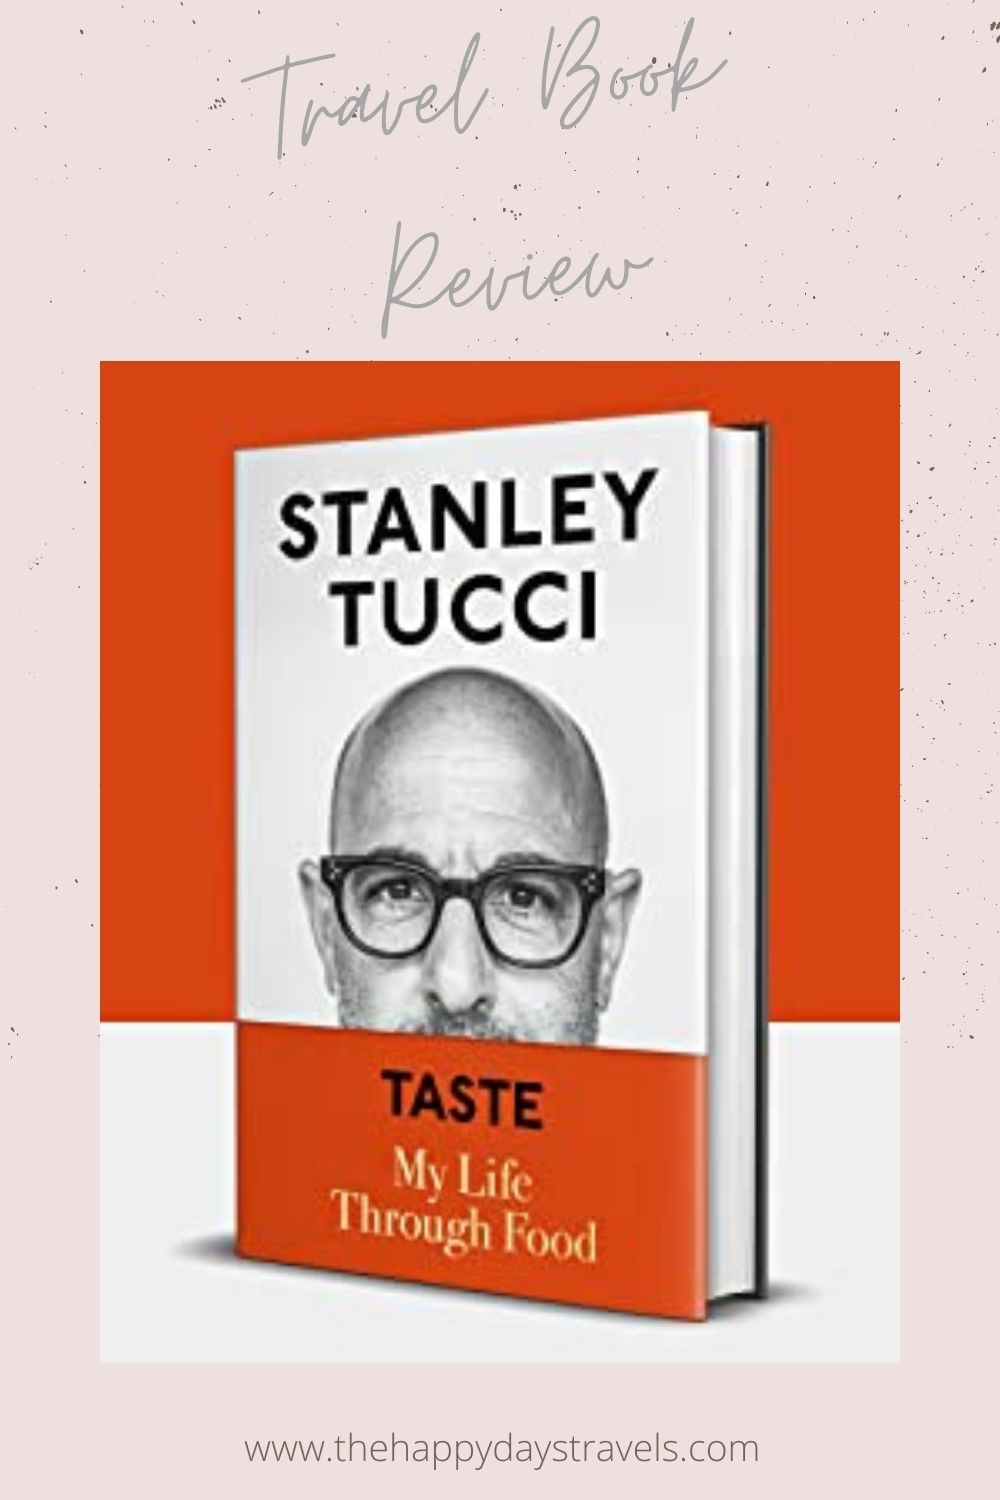 Pin Image. Pink background with grey, slanted writing at top centre saying 'Travel Book Review' and Tha Happy Days Travels link at bottom. In centre is an image of Stanley Tucci Taste Memoir book.